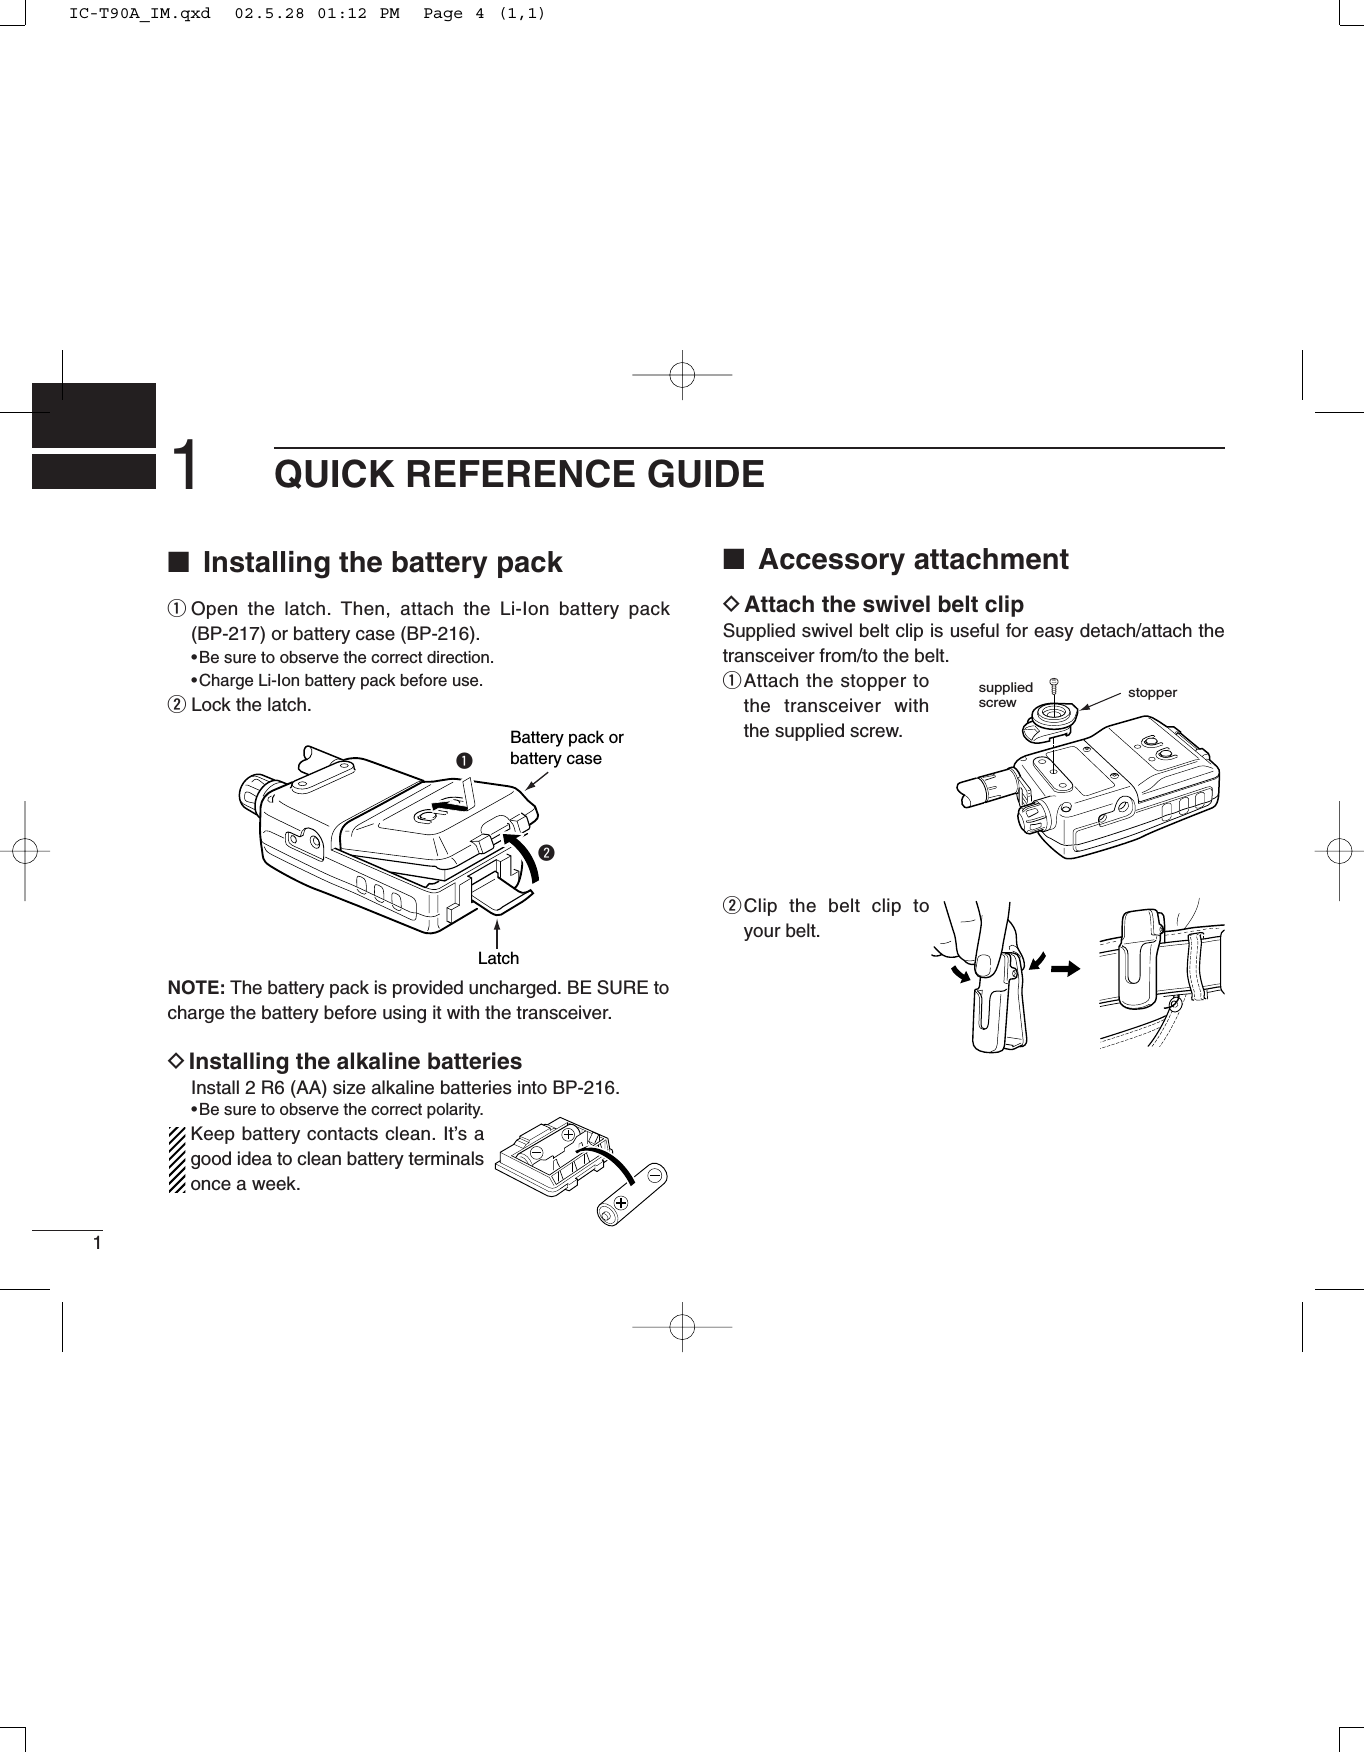 1QUICK REFERENCE GUIDE■Installing the battery packqOpen the latch. Then, attach the Li-Ion battery pack(BP-217) or battery case (BP-216).•Be sure to observe the correct direction.•Charge Li-Ion battery pack before use.wLock the latch.NOTE: The battery pack is provided uncharged. BE SURE tocharge the battery before using it with the transceiver.DInstalling the alkaline batteriesInstall 2 R6 (AA) size alkaline batteries into BP-216.•Be sure to observe the correct polarity.Keep battery contacts clean. It’s agood idea to clean battery terminalsonce a week. ■Accessory attachmentDAttach the swivel belt clip Supplied swivel belt clip is useful for easy detach/attach thetransceiver from/to the belt.qAttach the stopper tothe transceiver withthe supplied screw.wClip the belt clip toyour belt.Battery pack orbattery caseLatchqwstoppersuppliedscrew1IC-T90A_IM.qxd  02.5.28 01:12 PM  Page 4 (1,1)